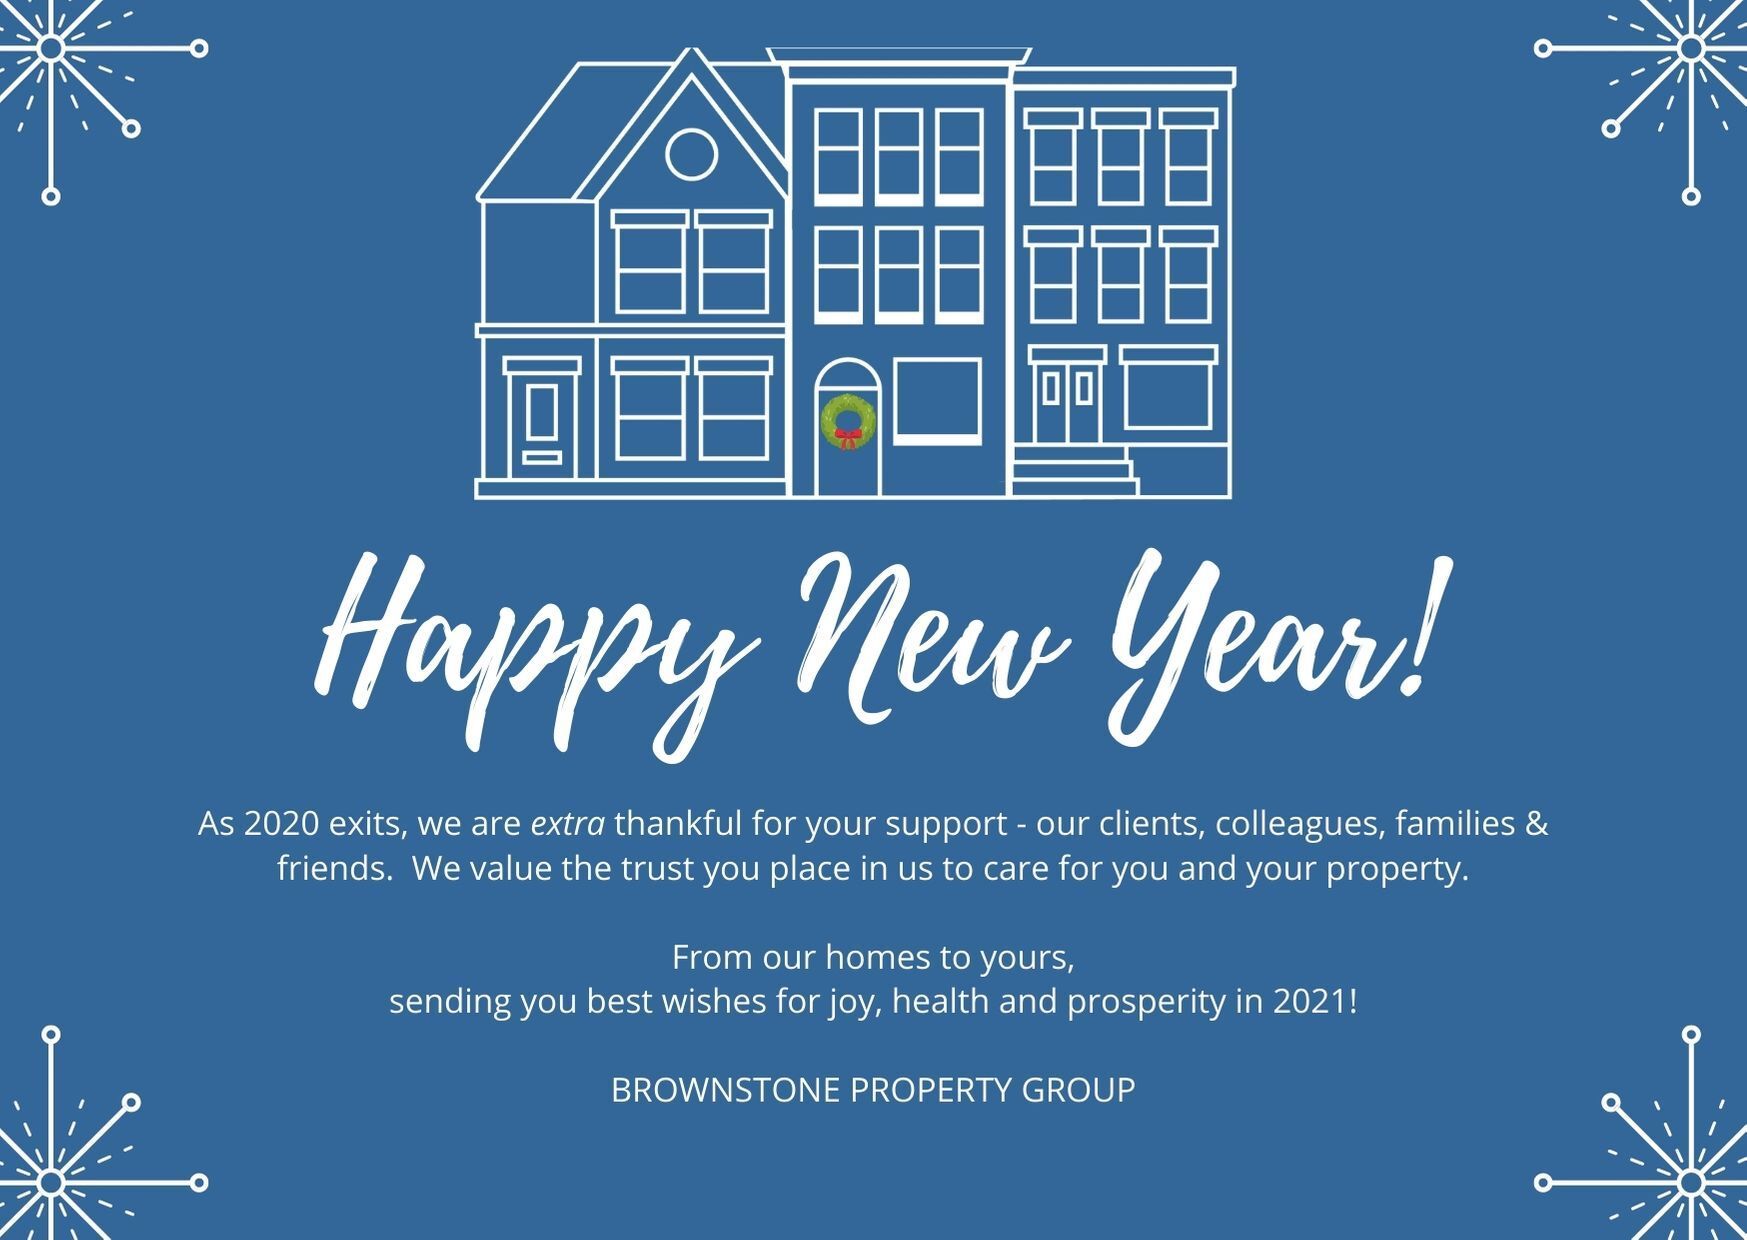 Happy New Year from Brownstone Property Group